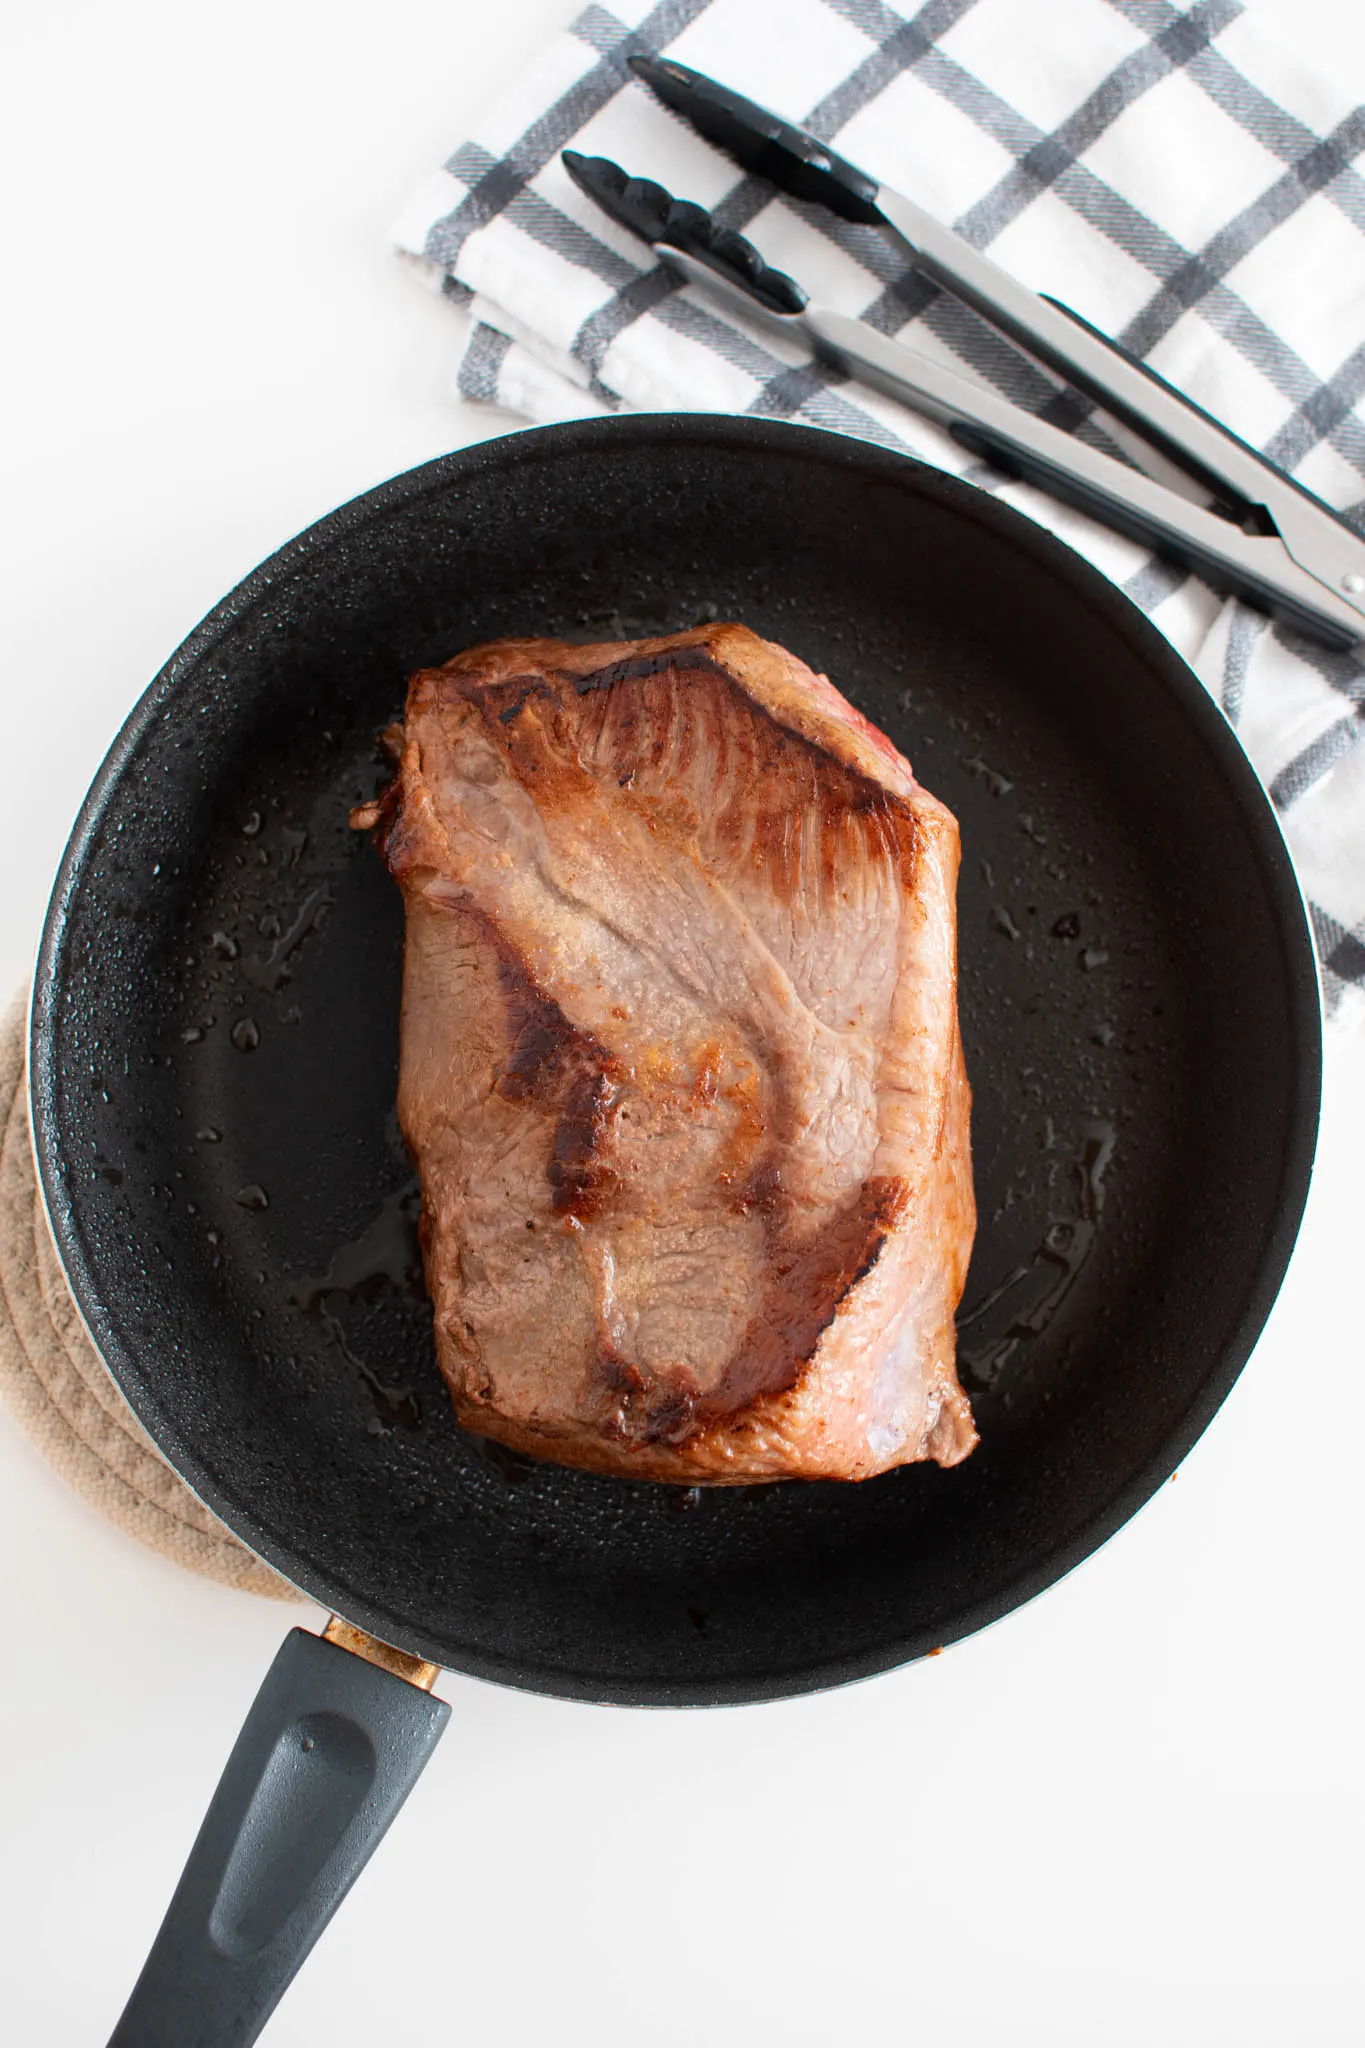 Seared roast in black frying pan on white table.